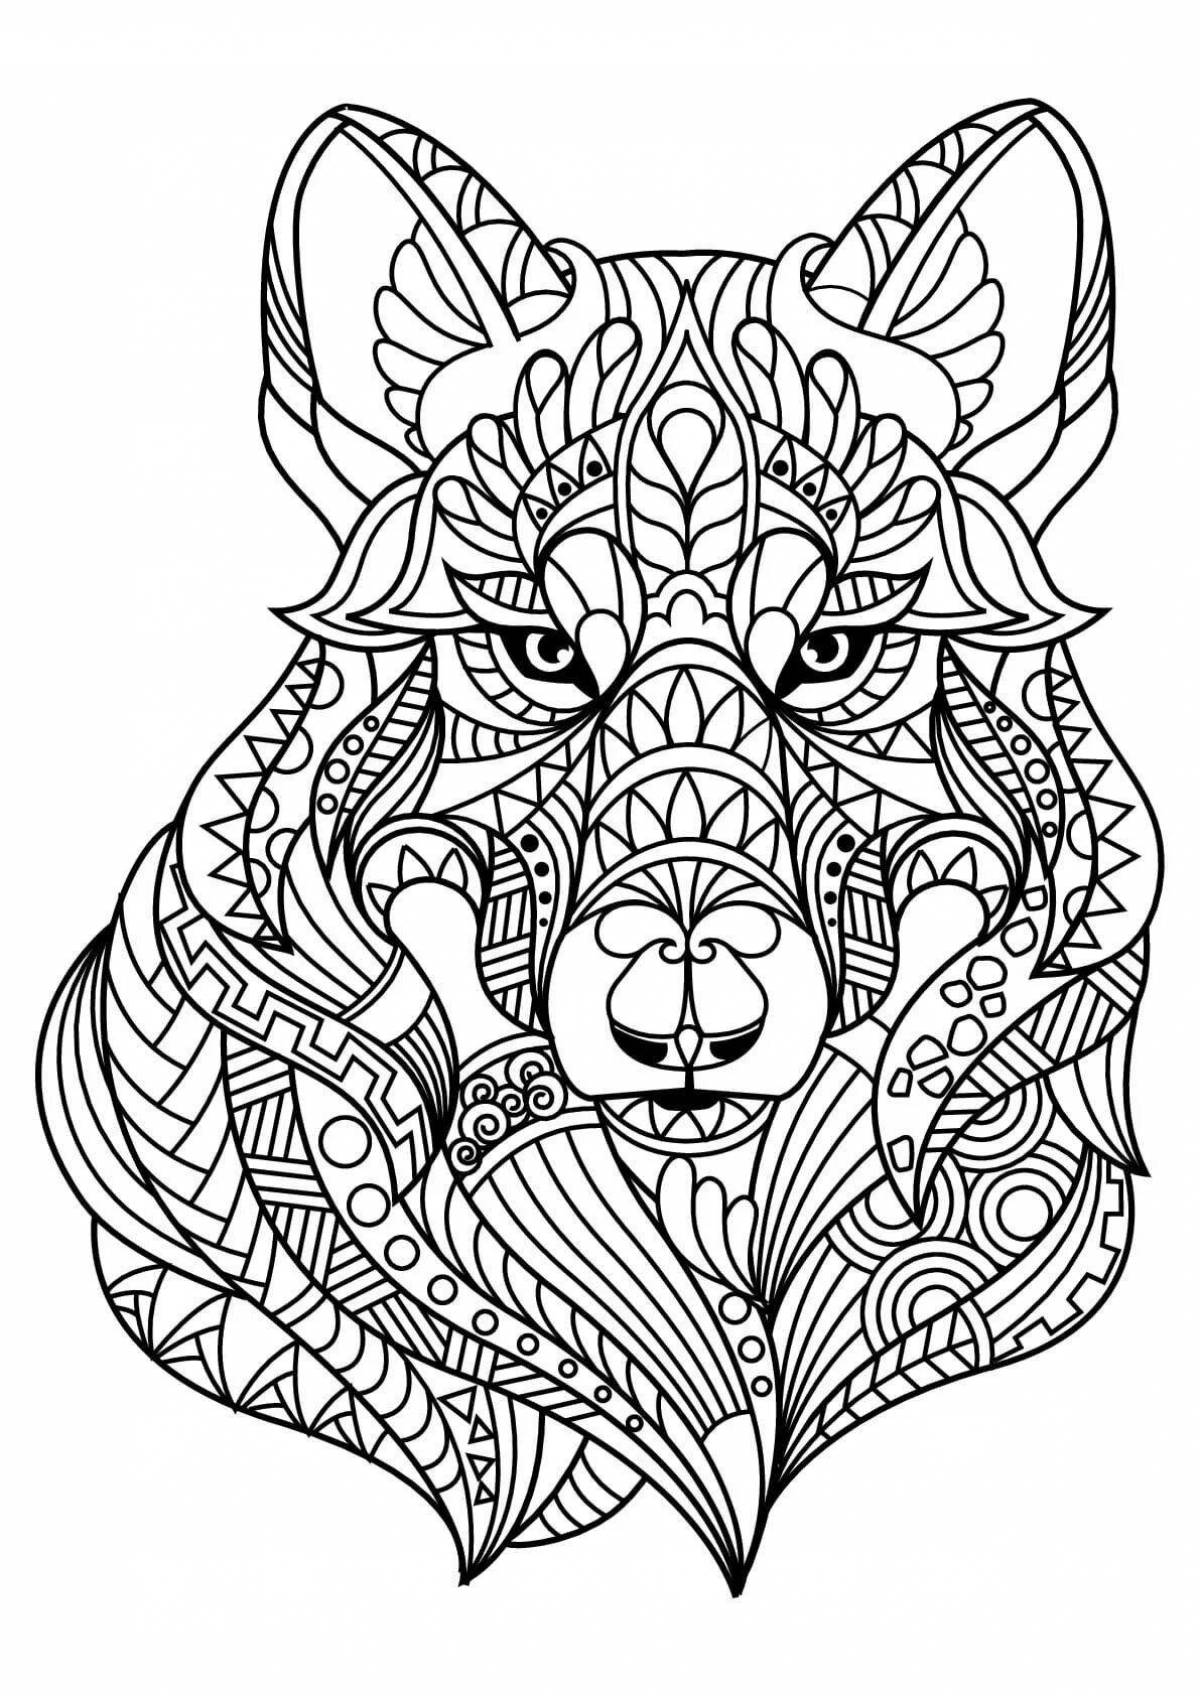 Dazzling animal coloring book for girls 12 years old